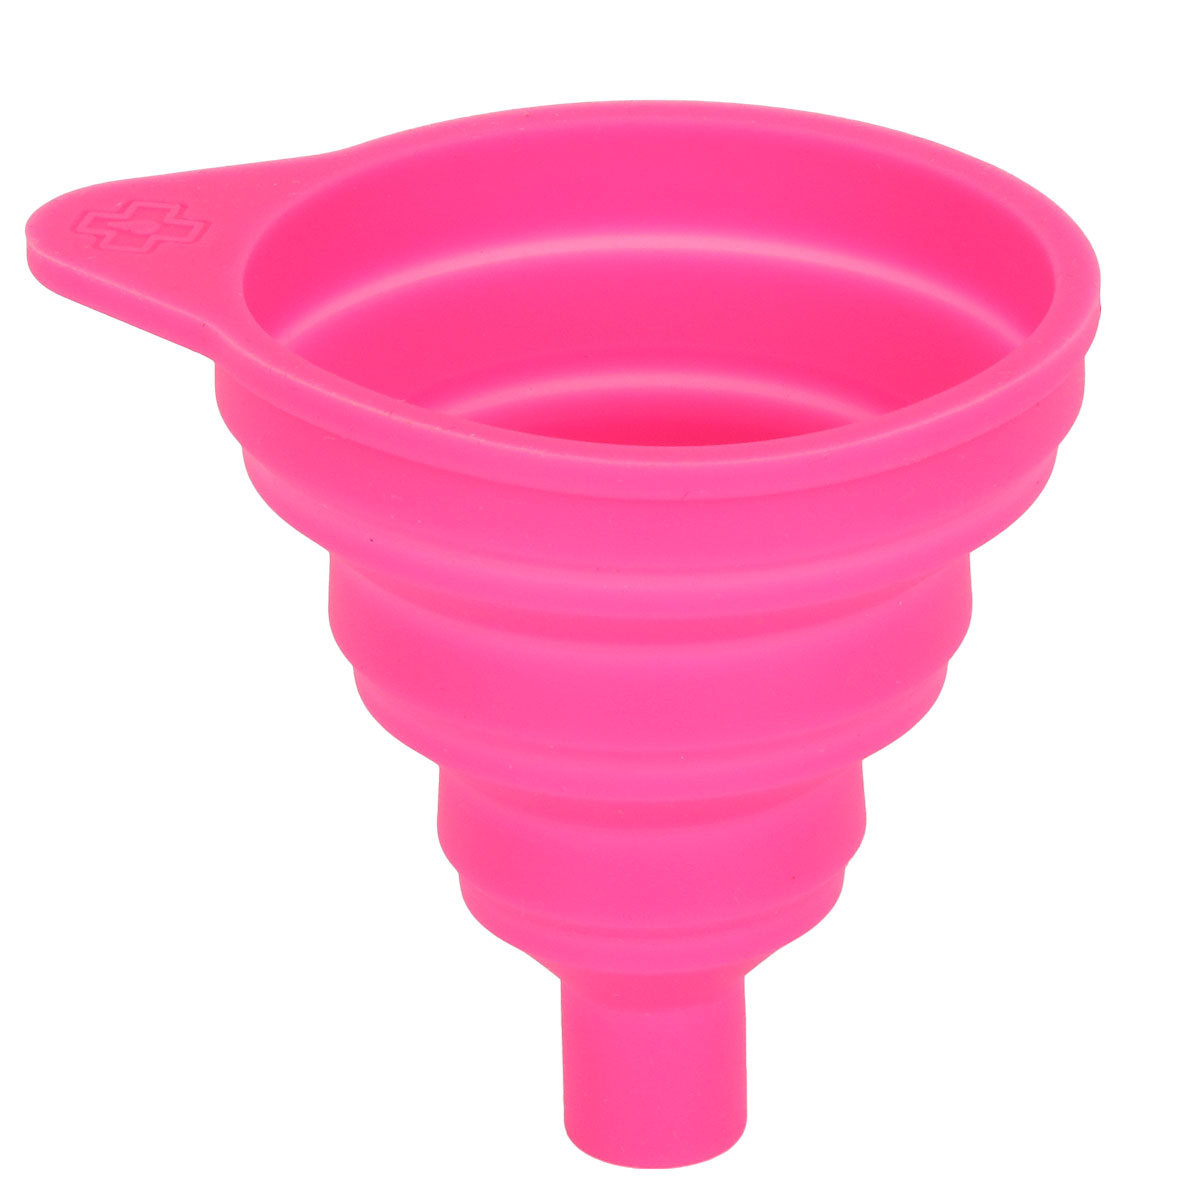 Productfoto van Muc-Off Opvouwbare Silicone Trechter - Small